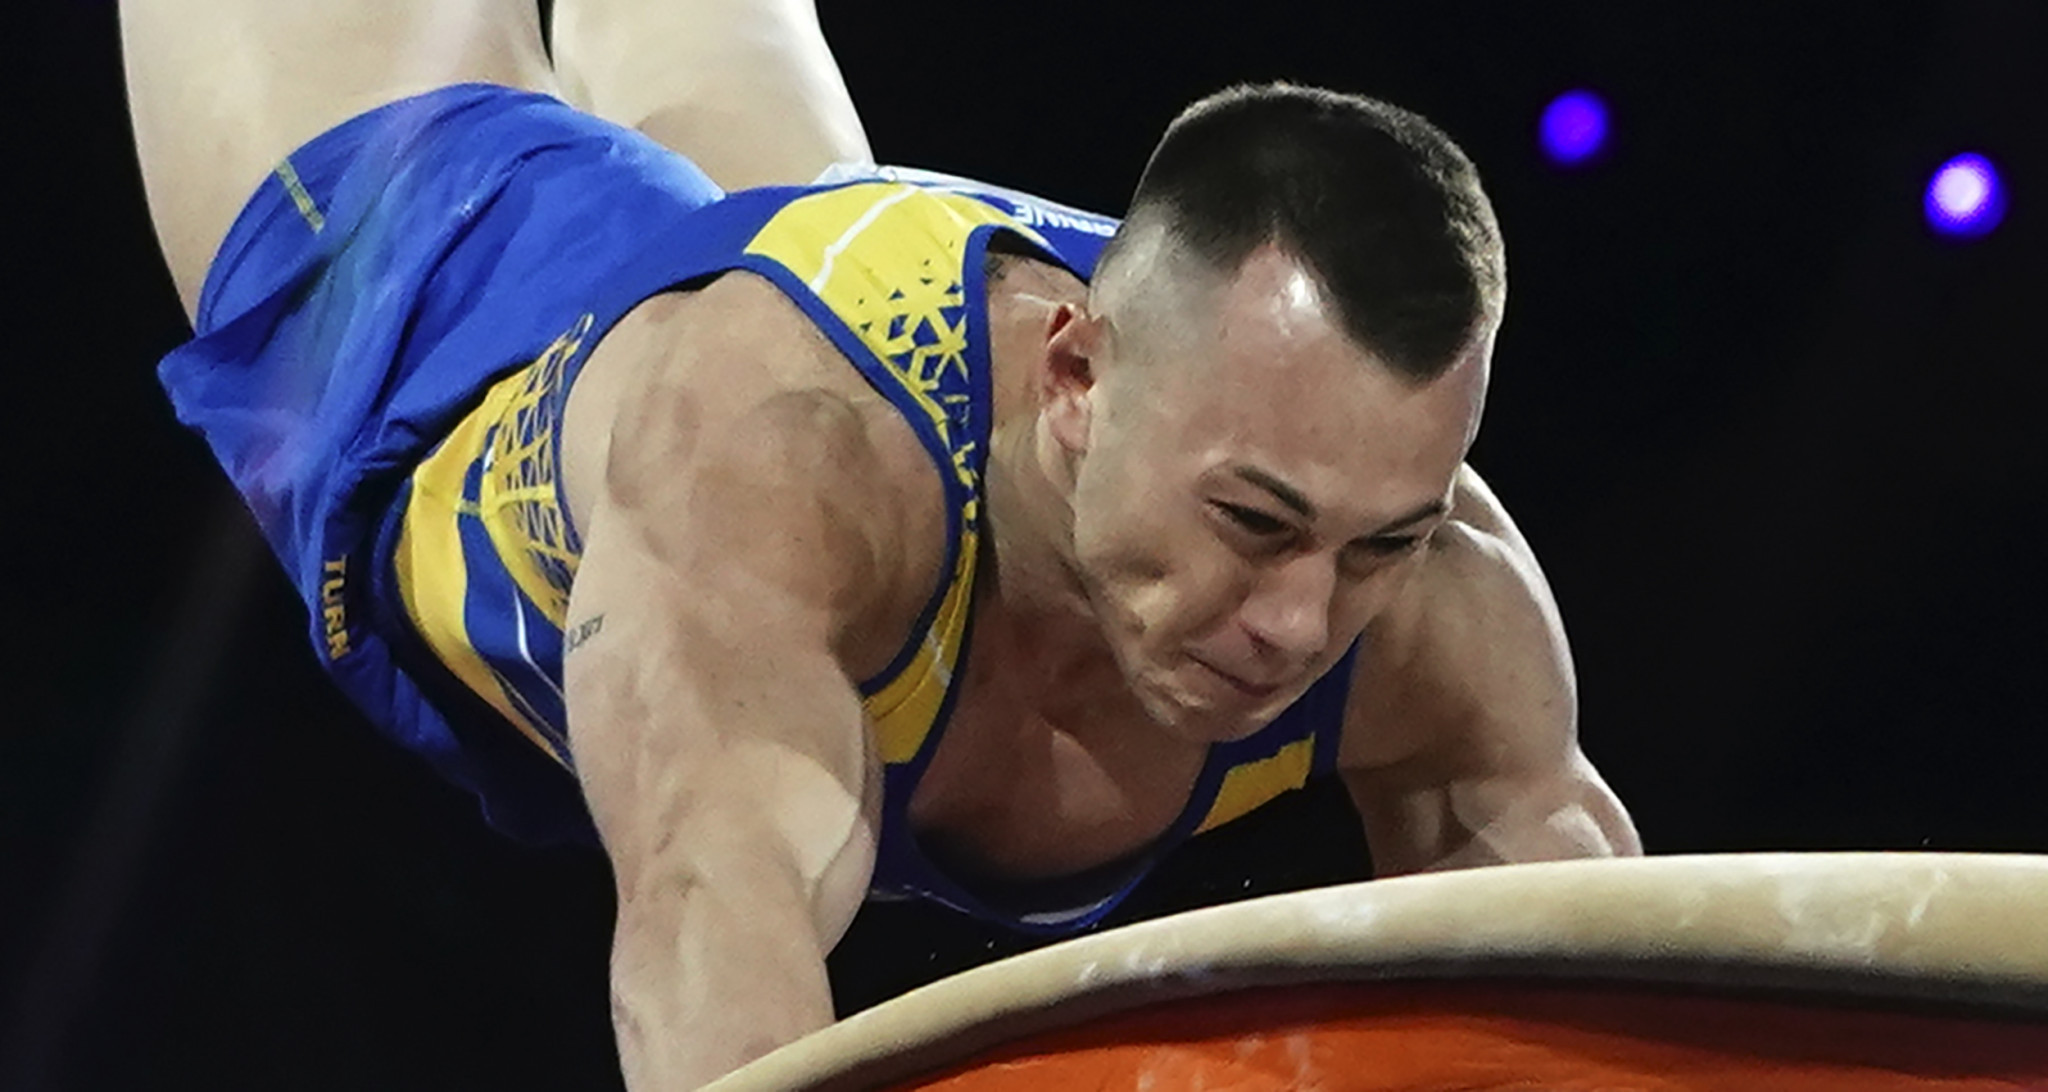 Japanese and Ukrainian gymnasts dominate final day of FIG Apparatus World Cup in Cottbus